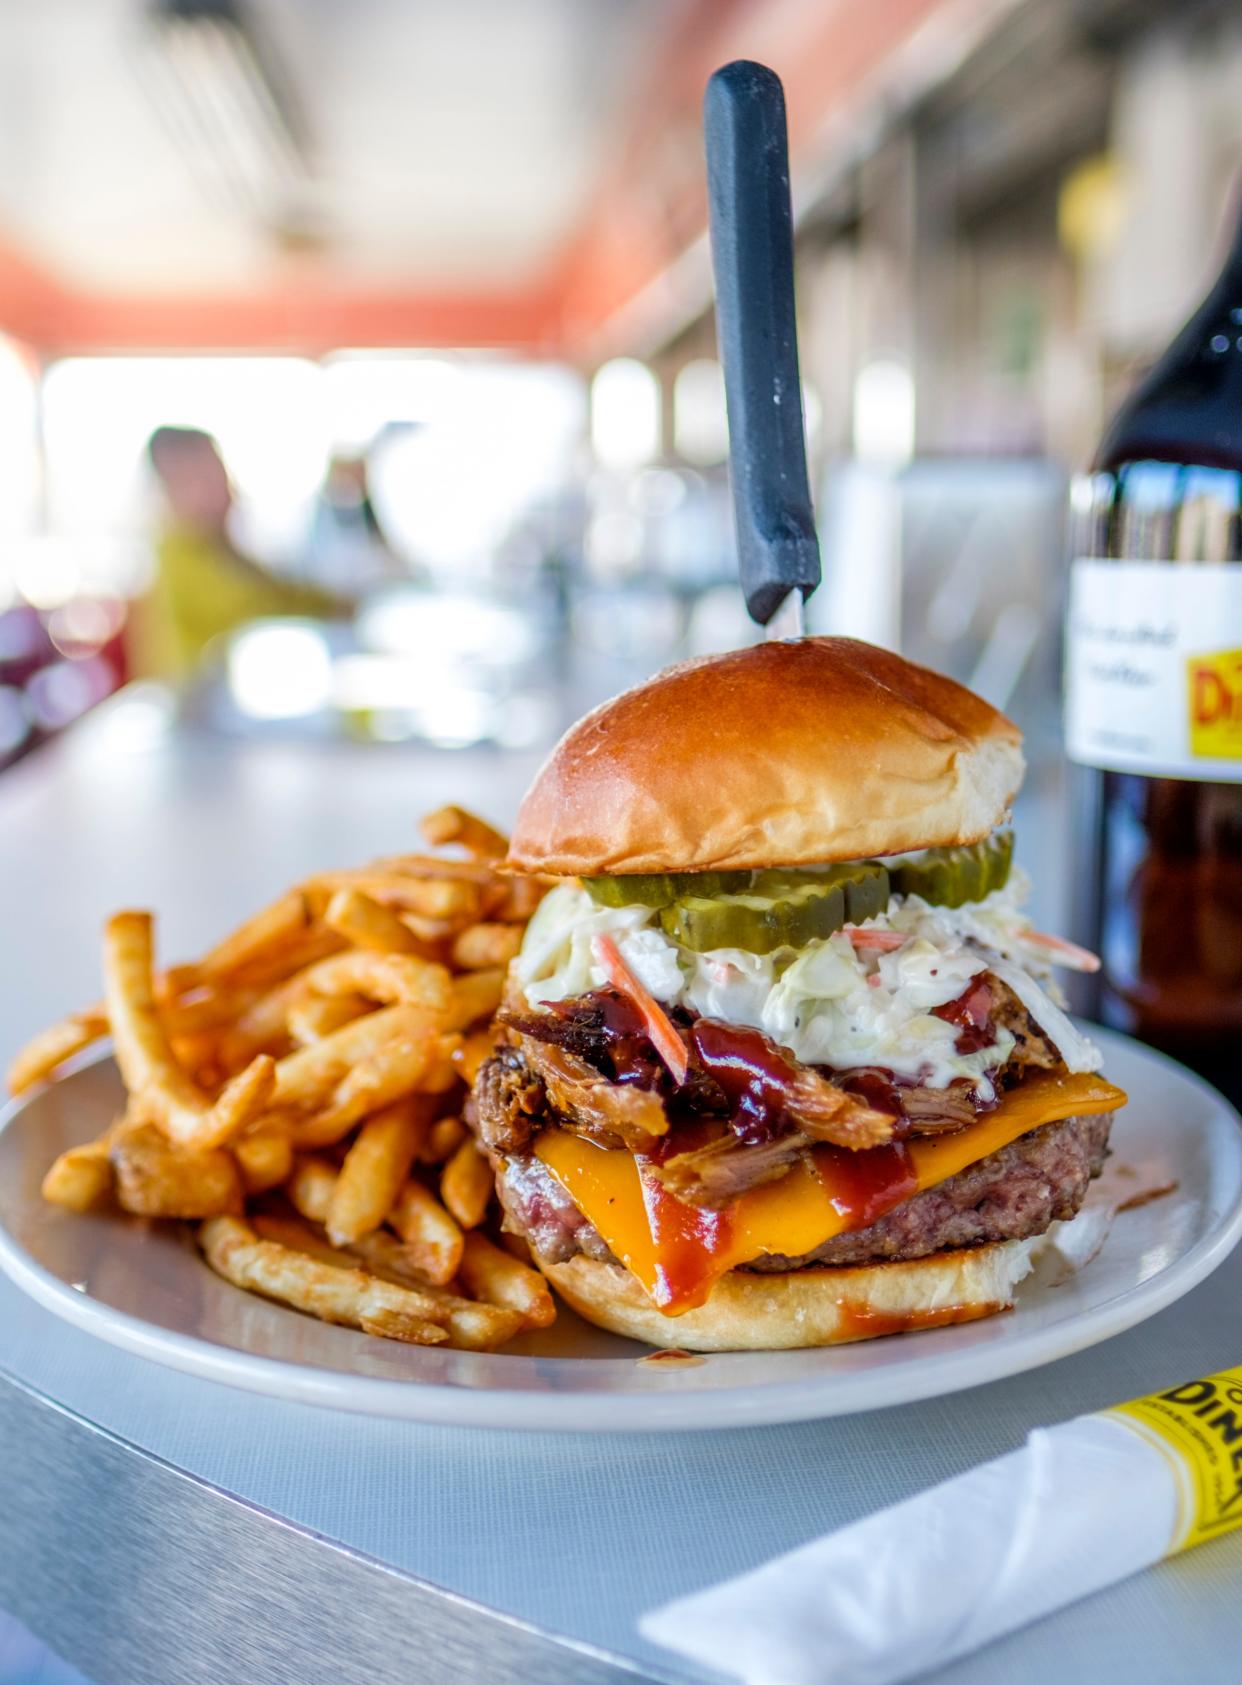 The Oasis Burger from Oasis Diner is among the $7 offerings during the Indianapolis Burger Week June 20-26, 2022.